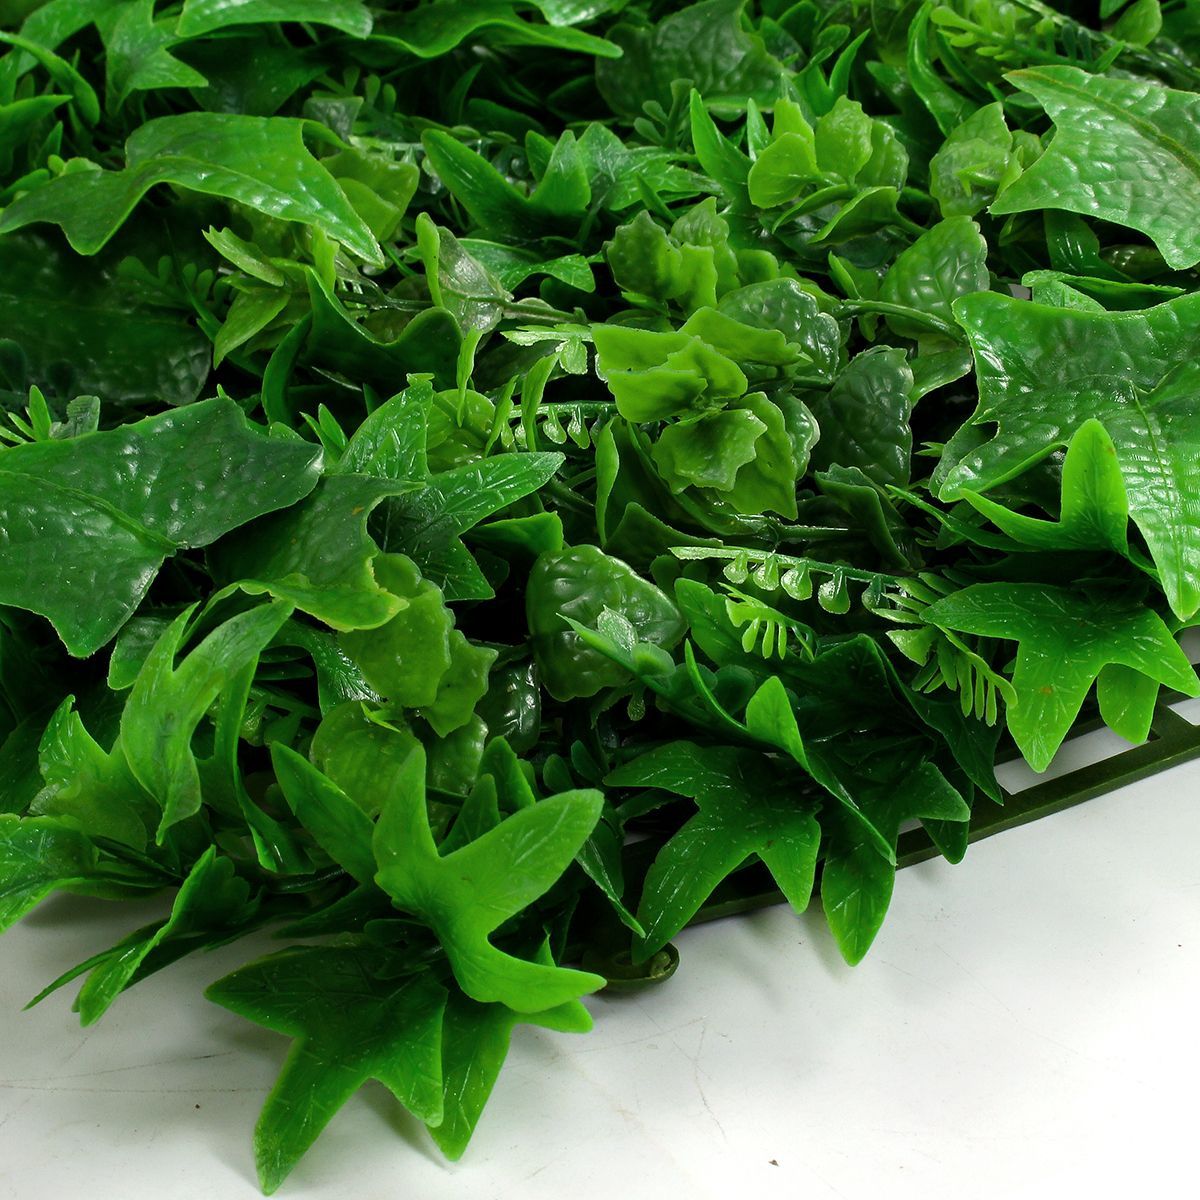 4Pcs-Anti-UV-Artificial-Hedge-Mat-Board-Ivy-Bushes-Background-Fence-Wall-Decor-1707024